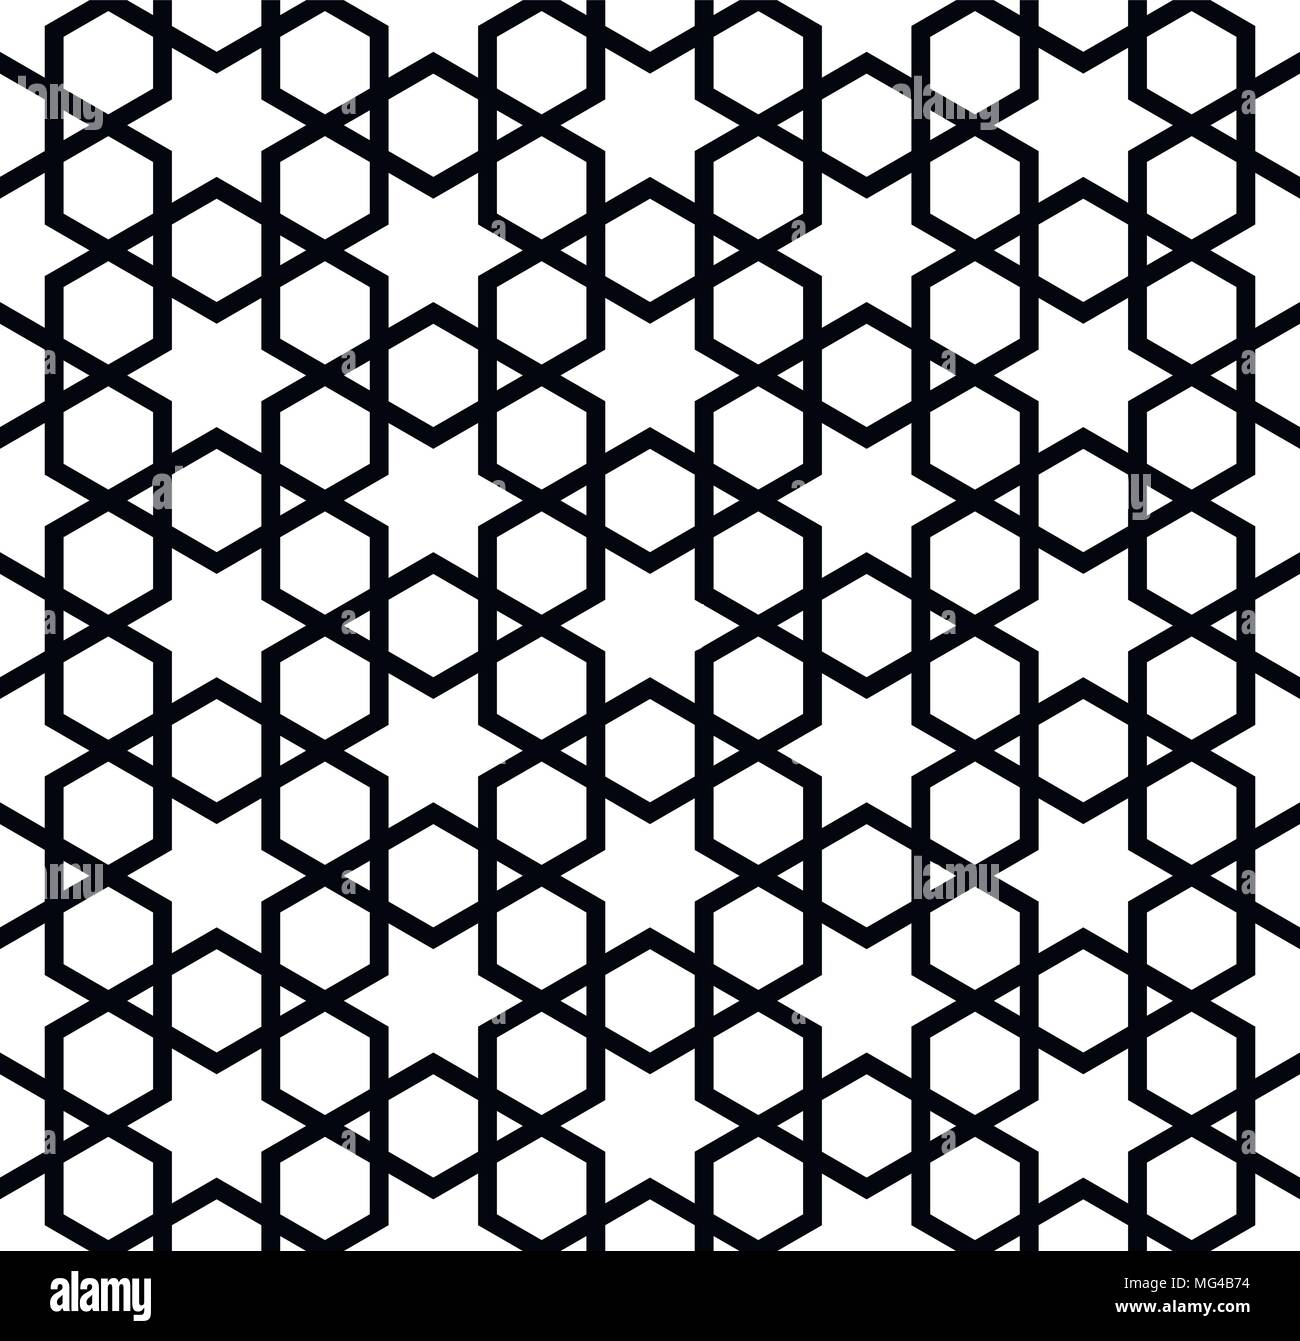 Star seamless pattern. Black stars on white retro background. Chaotic  elements. Abstract geometric shape texture. Seamless pattern for web, print  Stock Vector Image & Art - Alamy